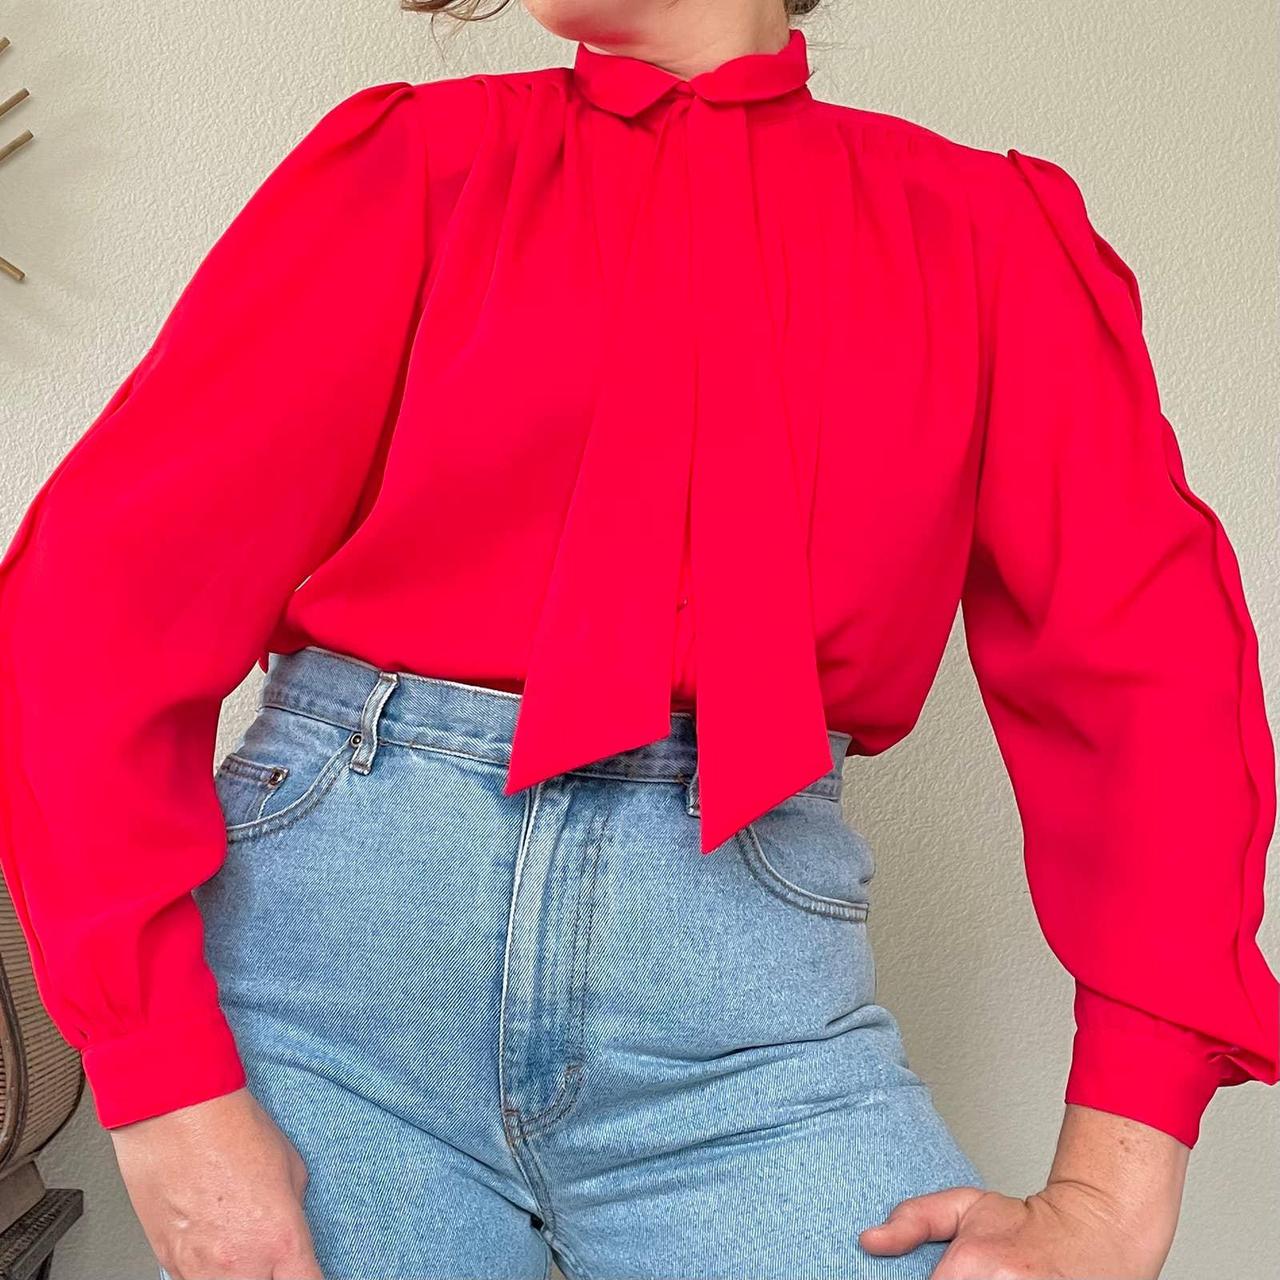 American Vintage Women's Red Blouse